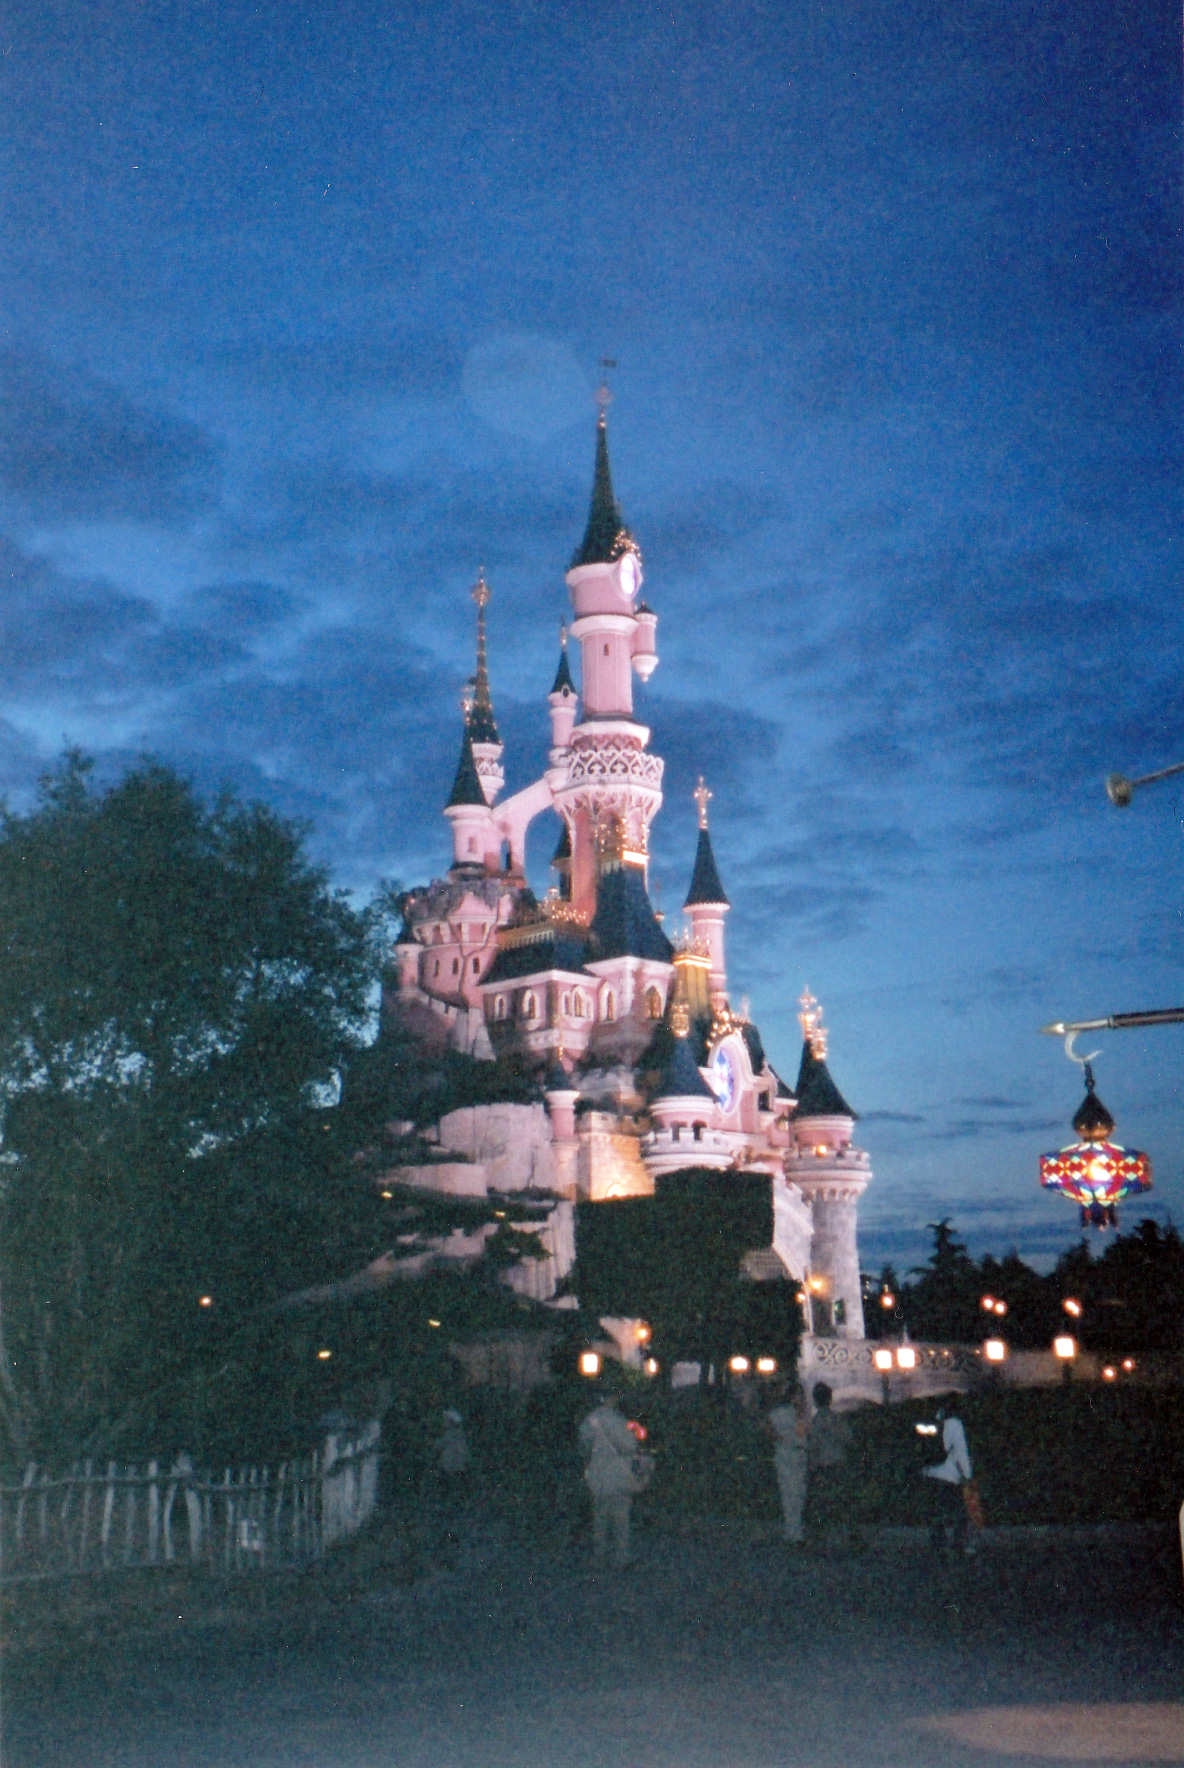 Photos from Yesteryear: DLP in 2002 – Dedicated To DLP